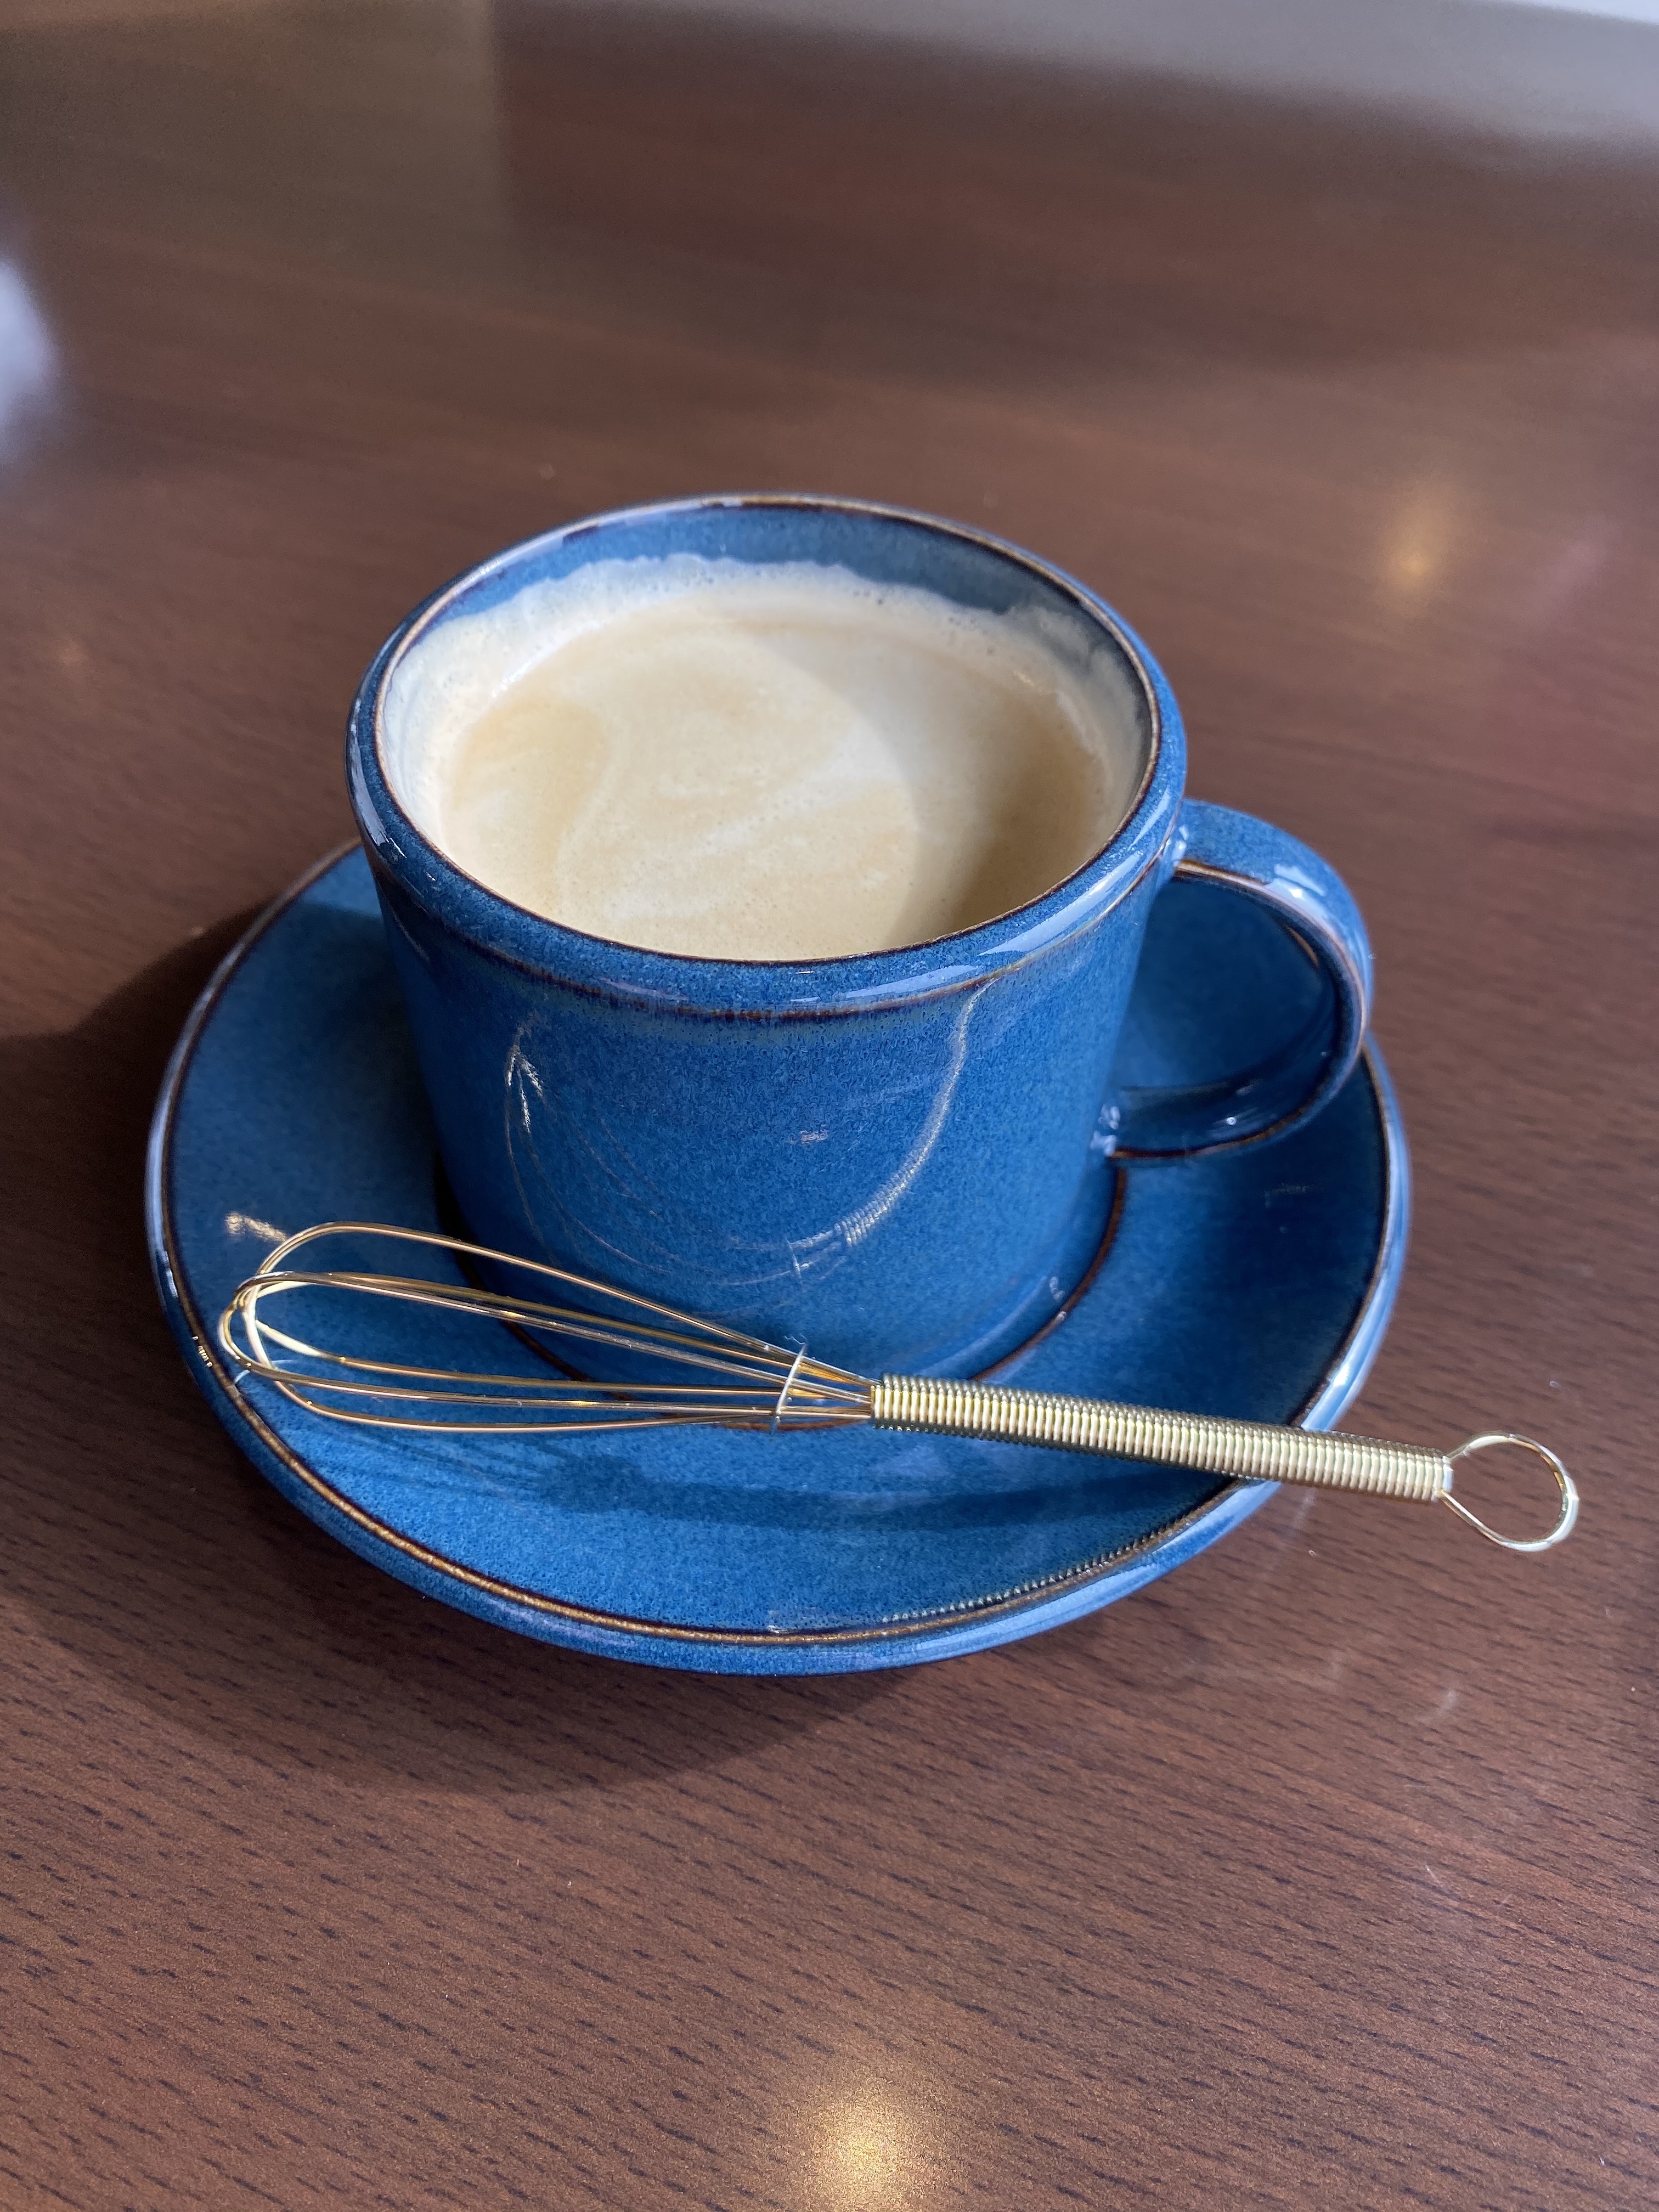 Foamy coffee with a royal blue ceramic mug and gold wisk